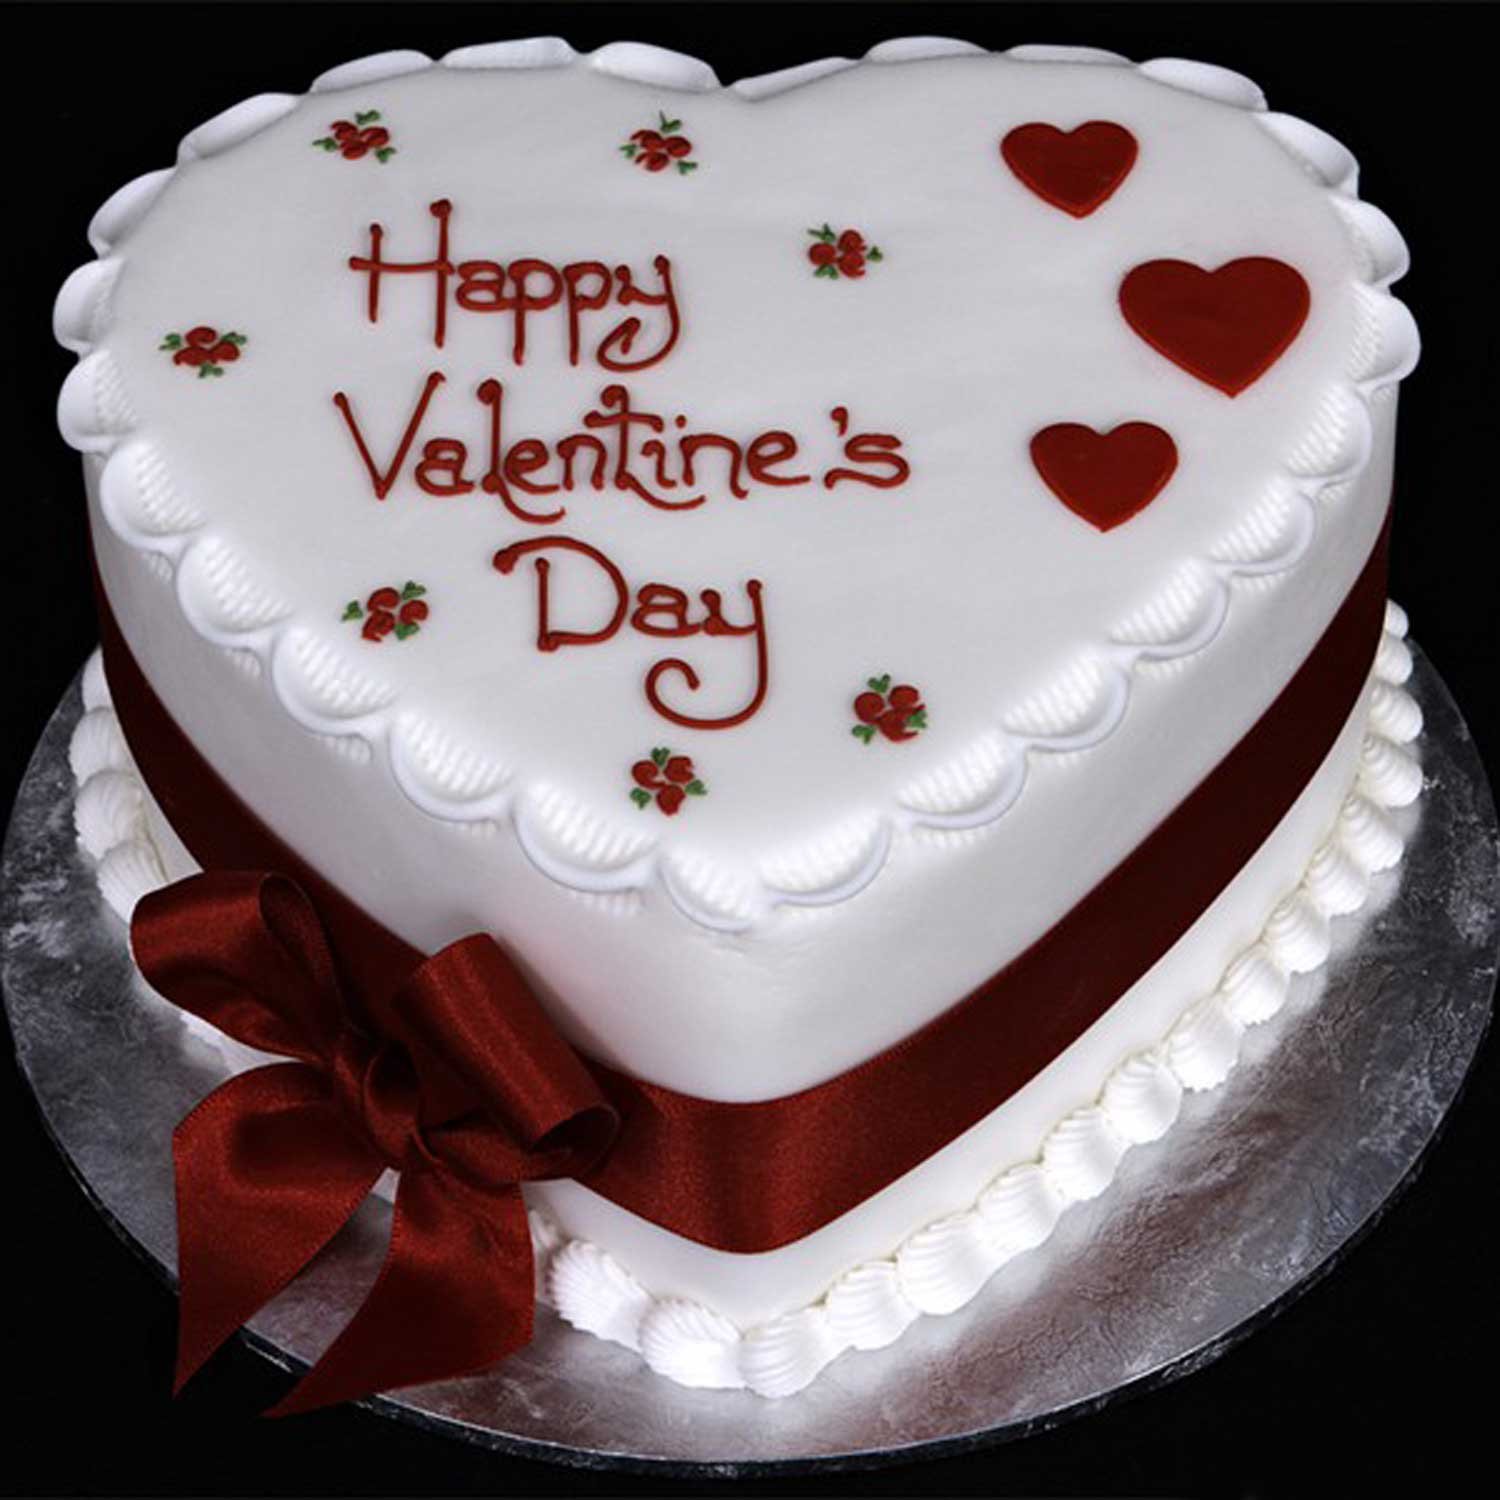 Love Heart Cake - Online Order Cake Deliveries in Chennai